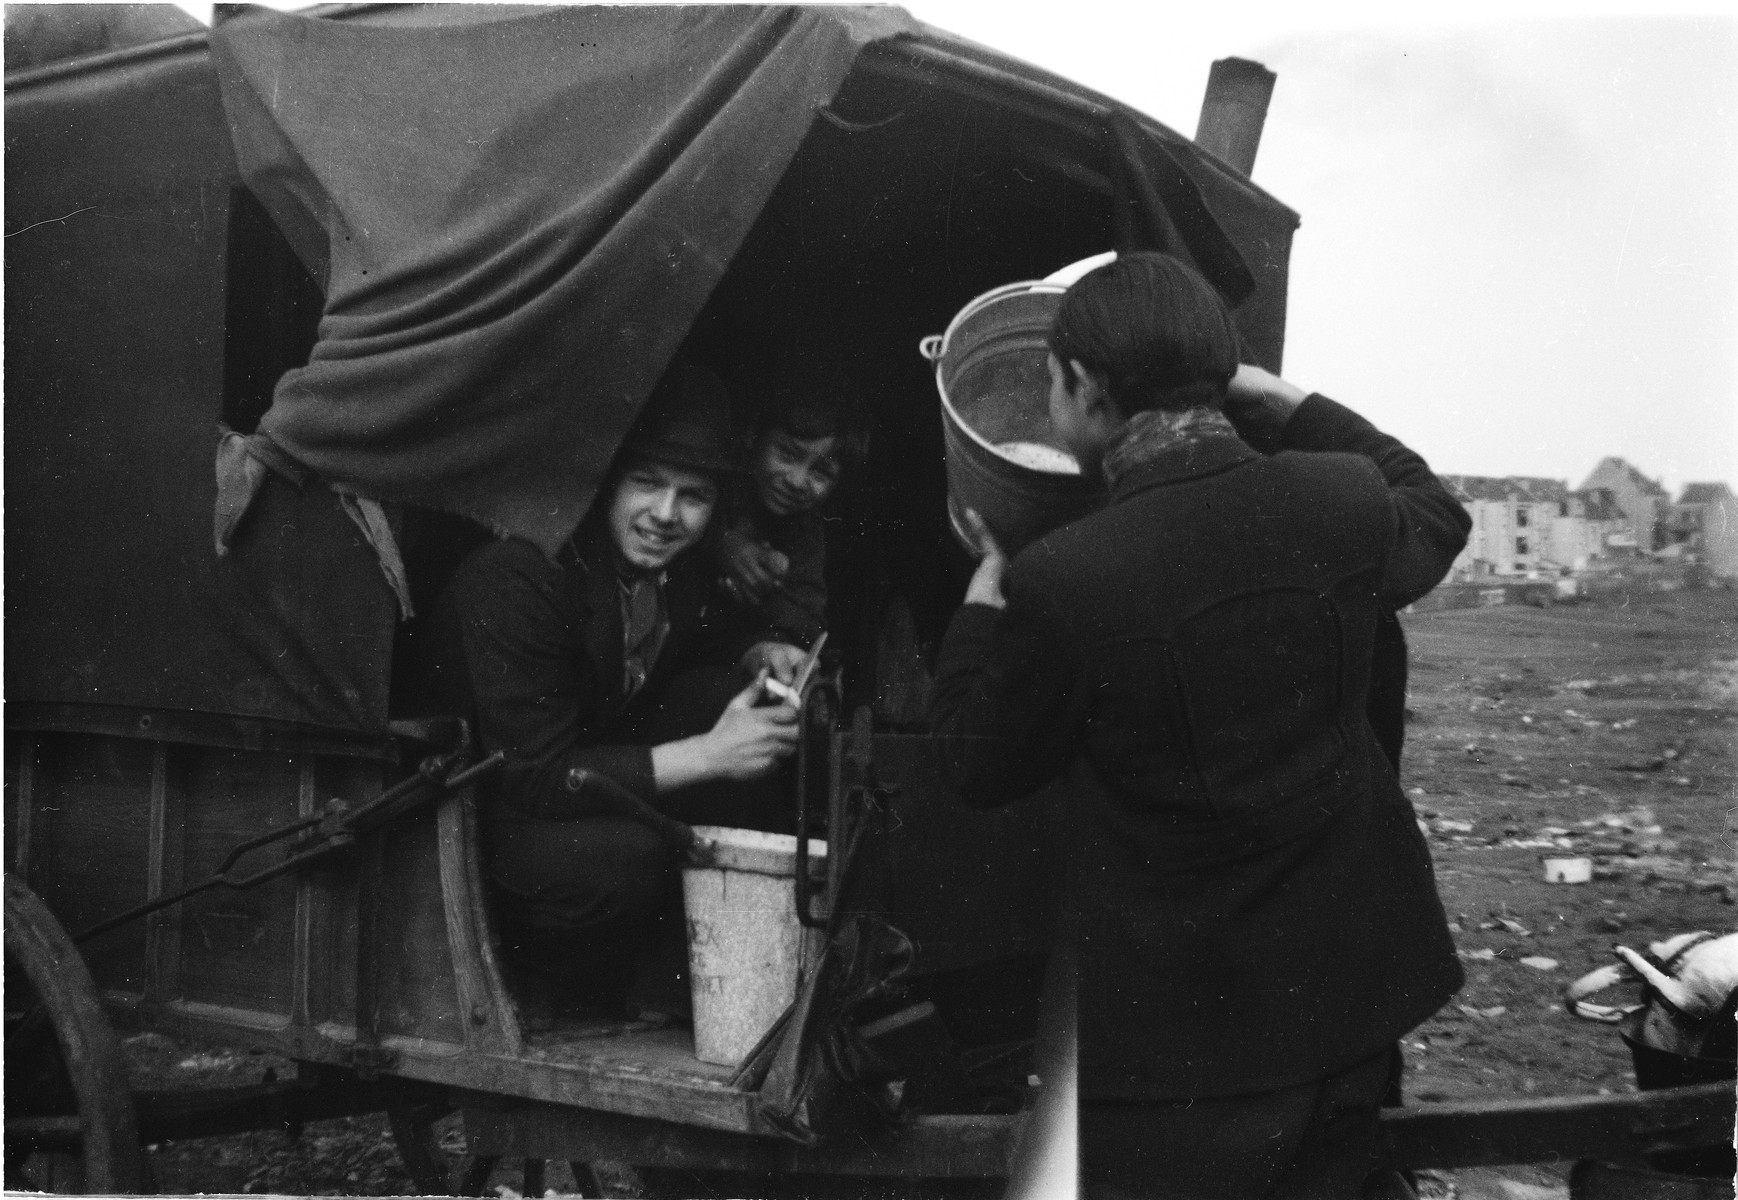 Two Romani women seated in their caravan work with a Romani man, who is lifting a  bucket.